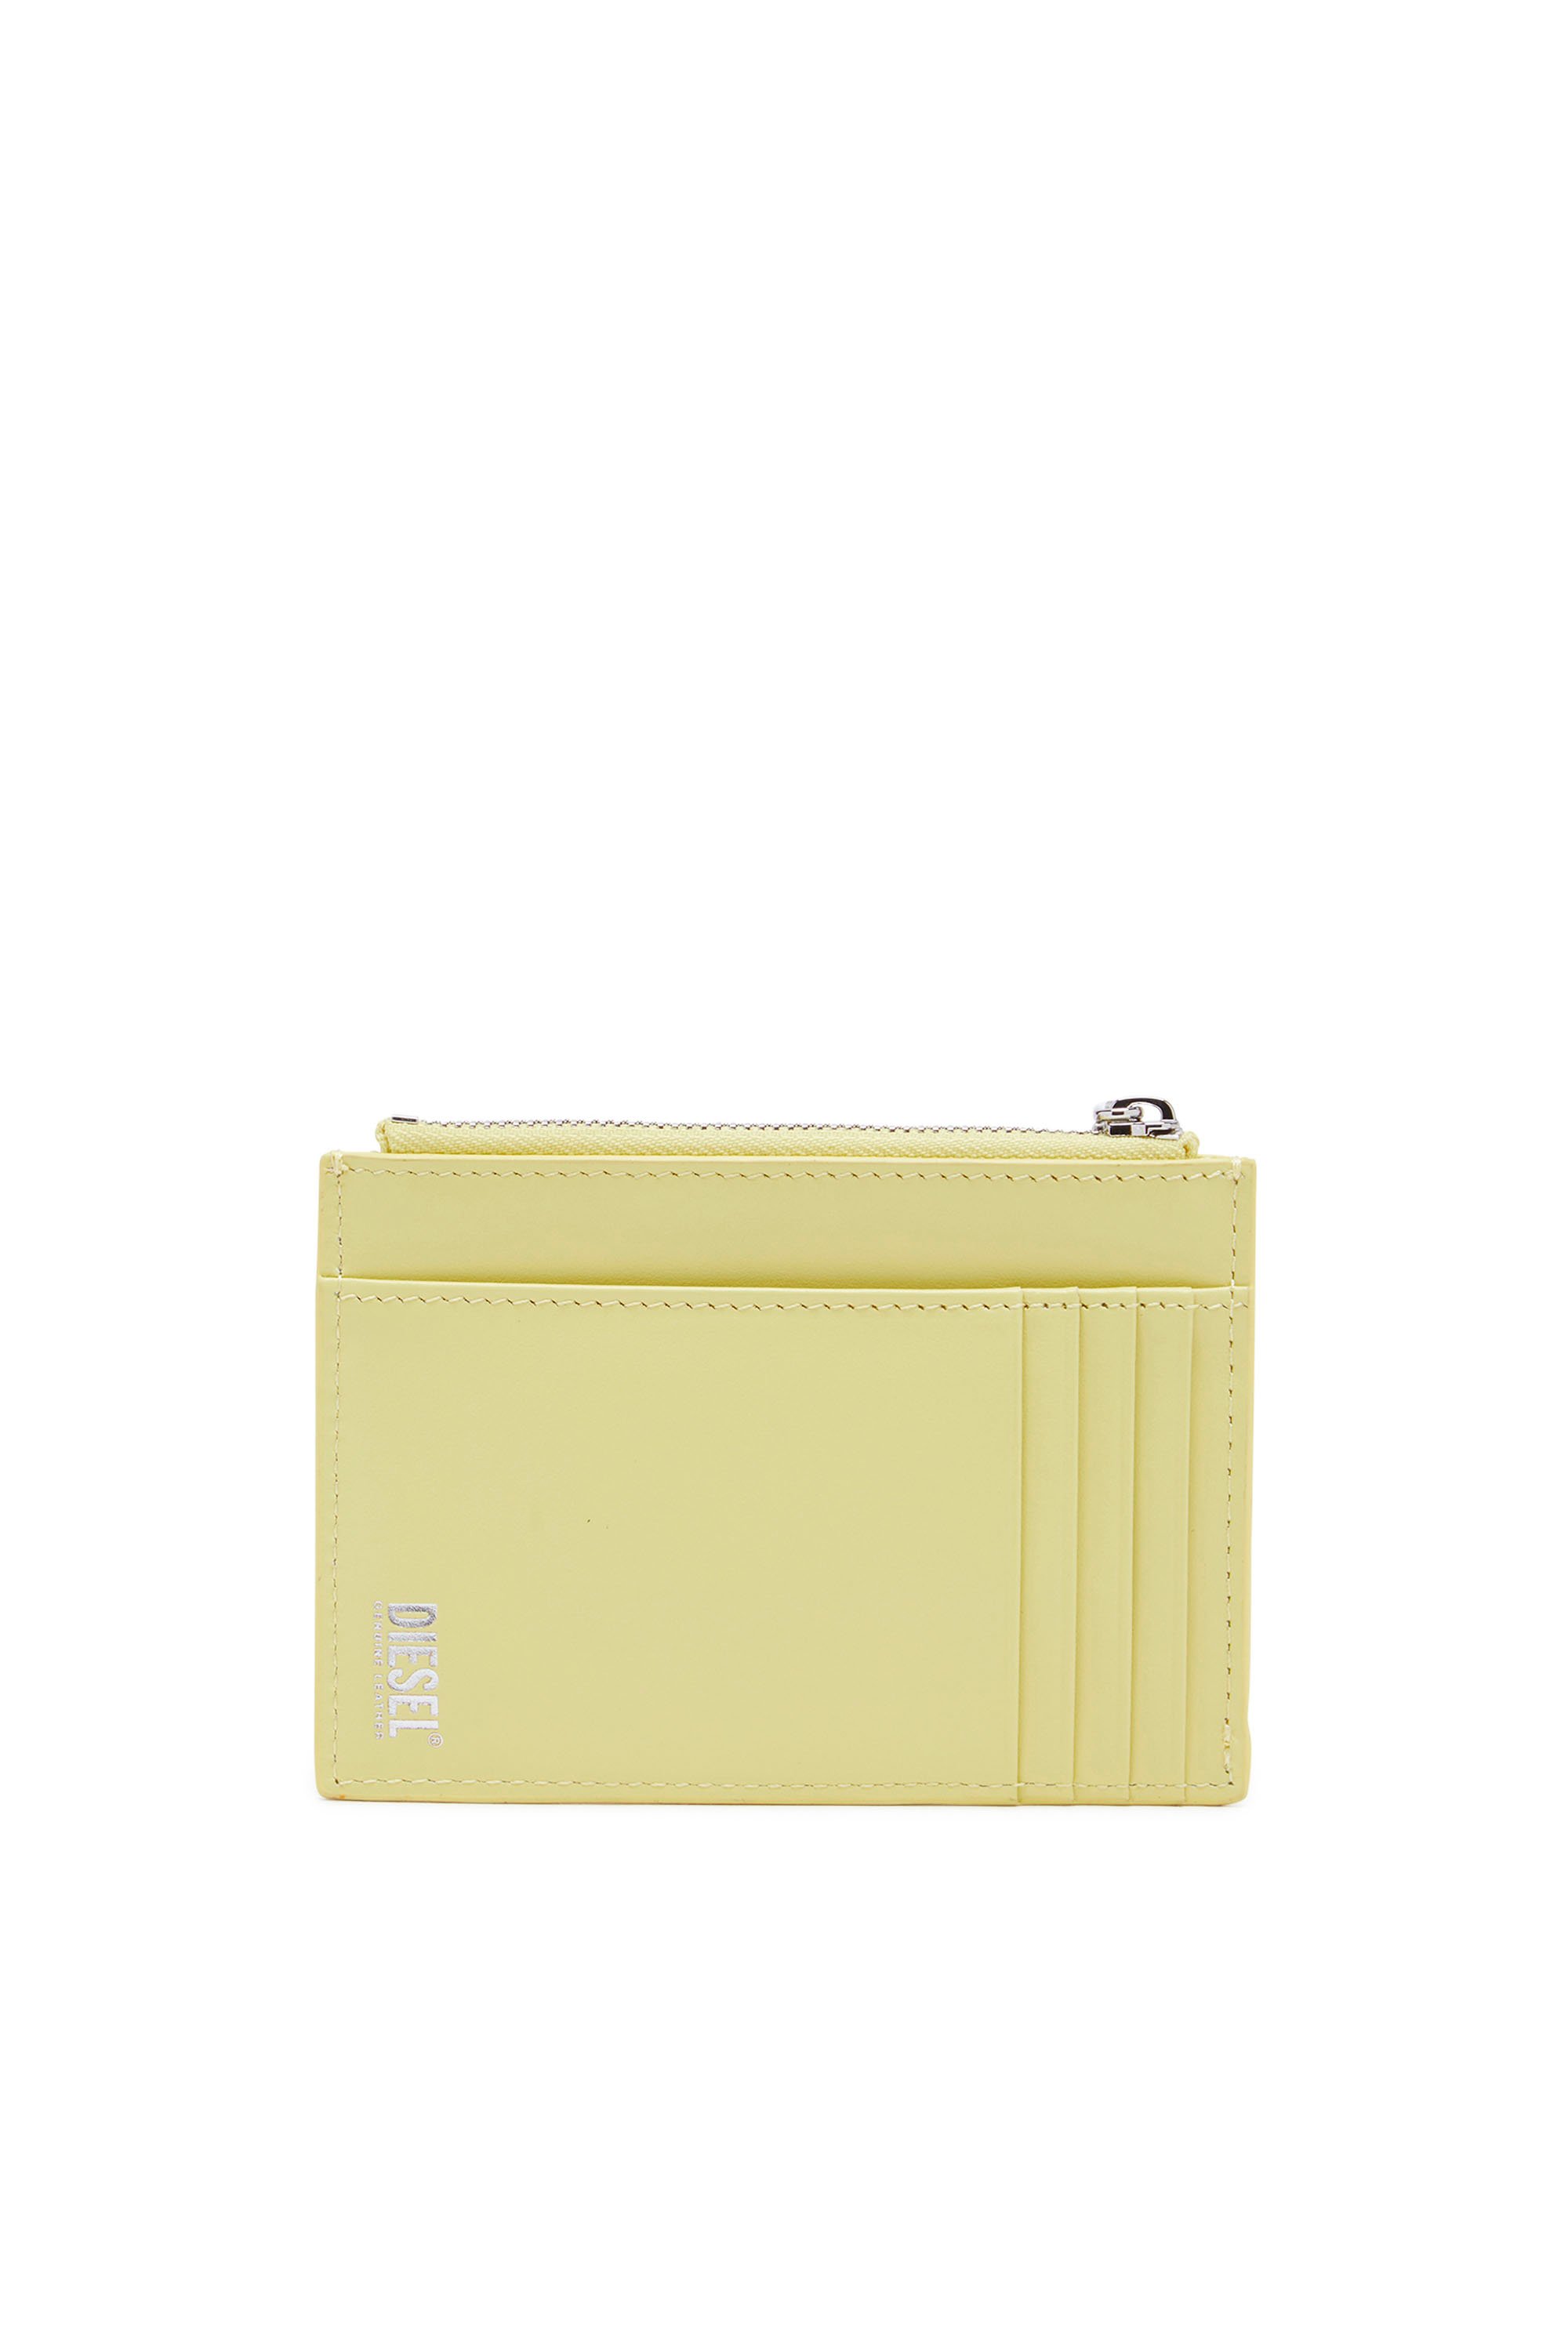 Diesel - 1DR CARD HOLDER I, Woman Card holder in pastel leather in Yellow - Image 2